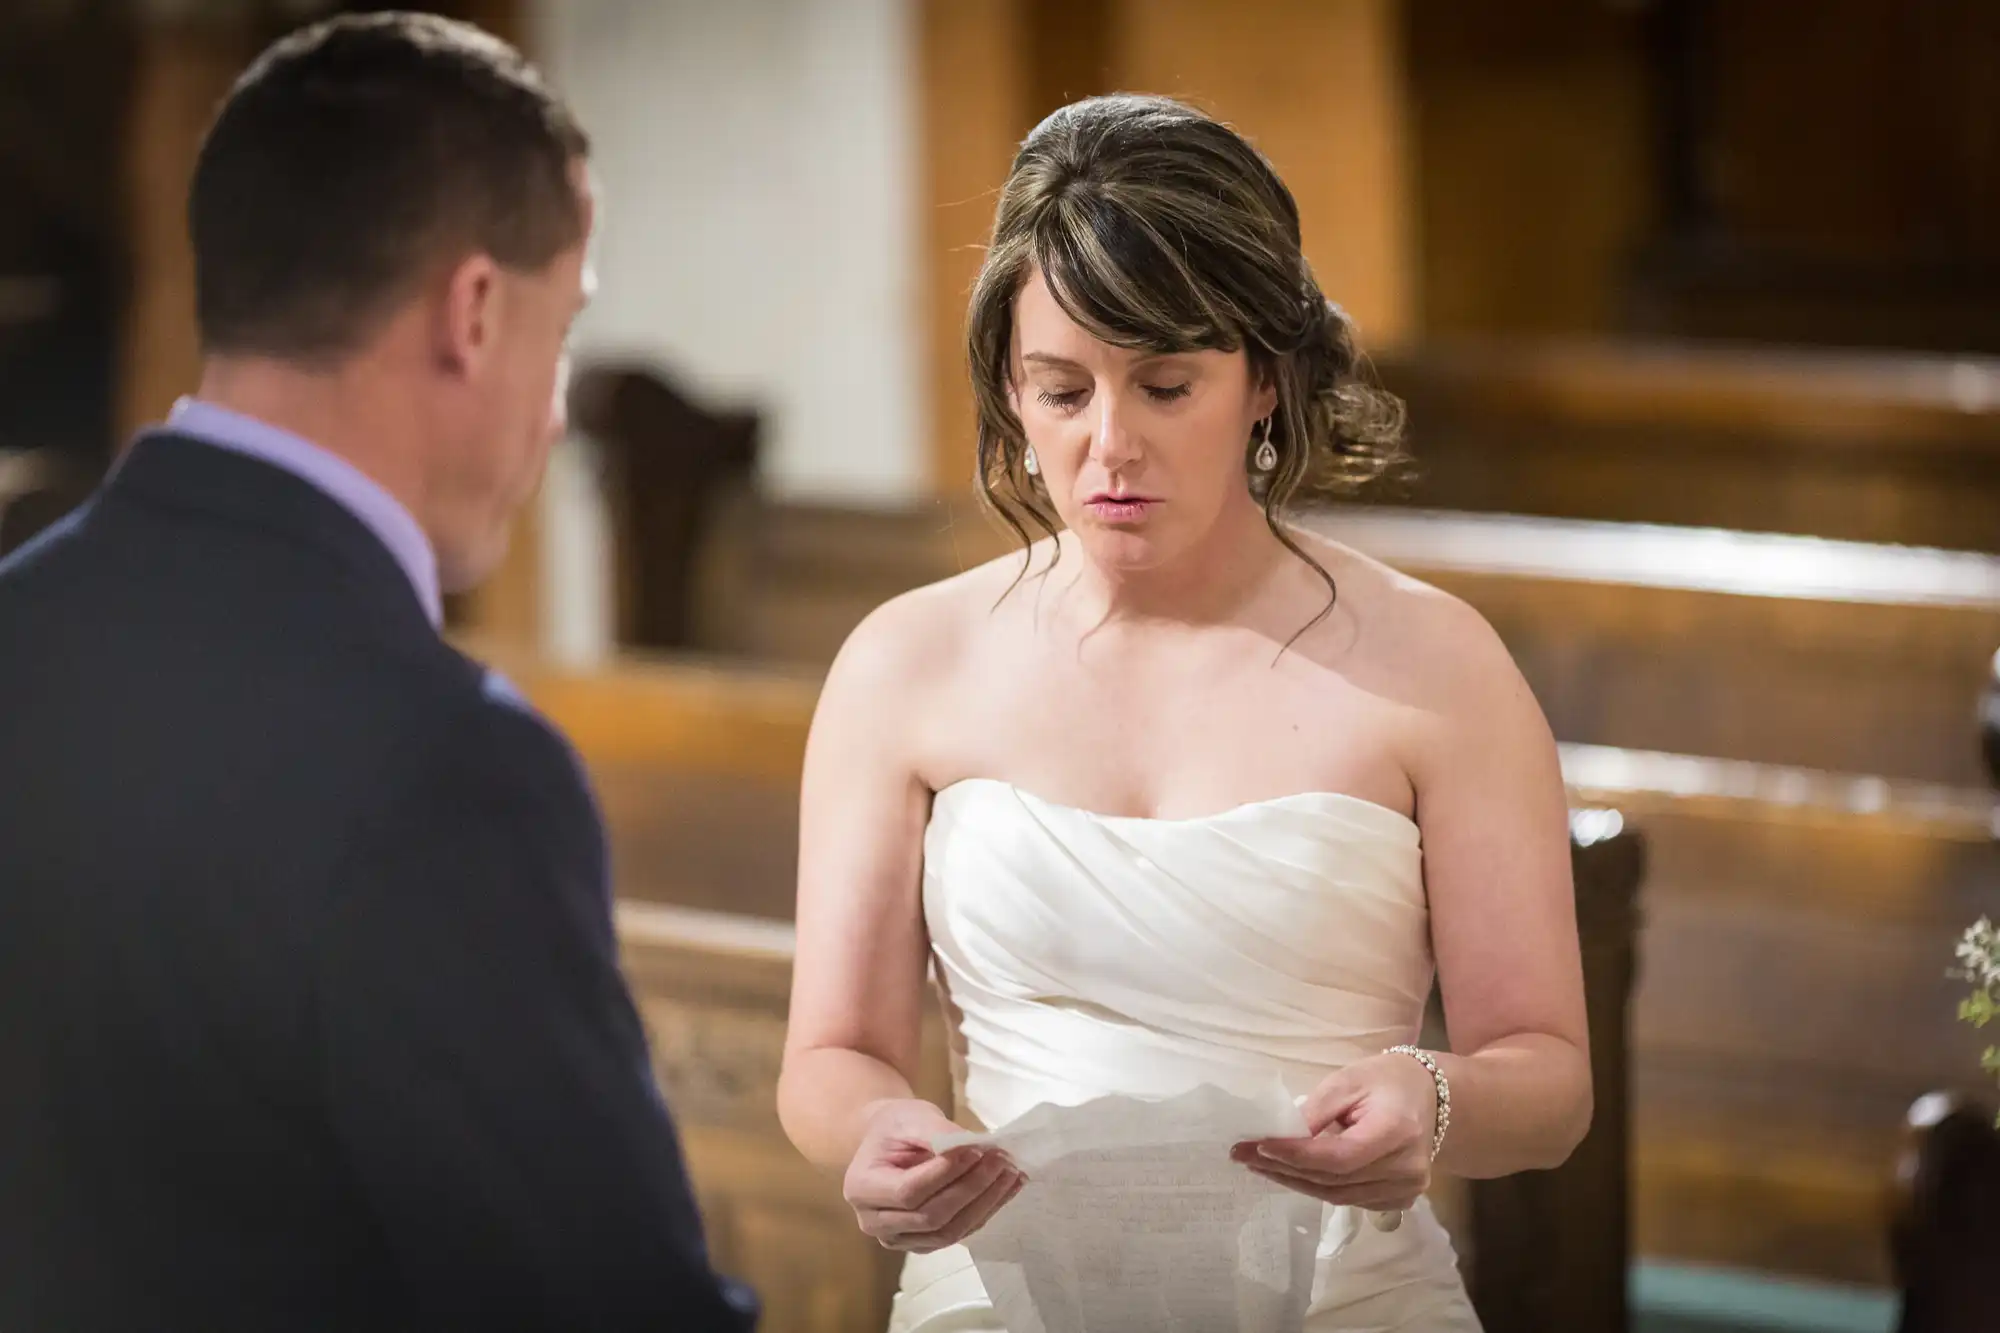 A bride in a white strapless gown reads her vows to the groom inside a church, holding a paper, with expressions of emotion on her face.